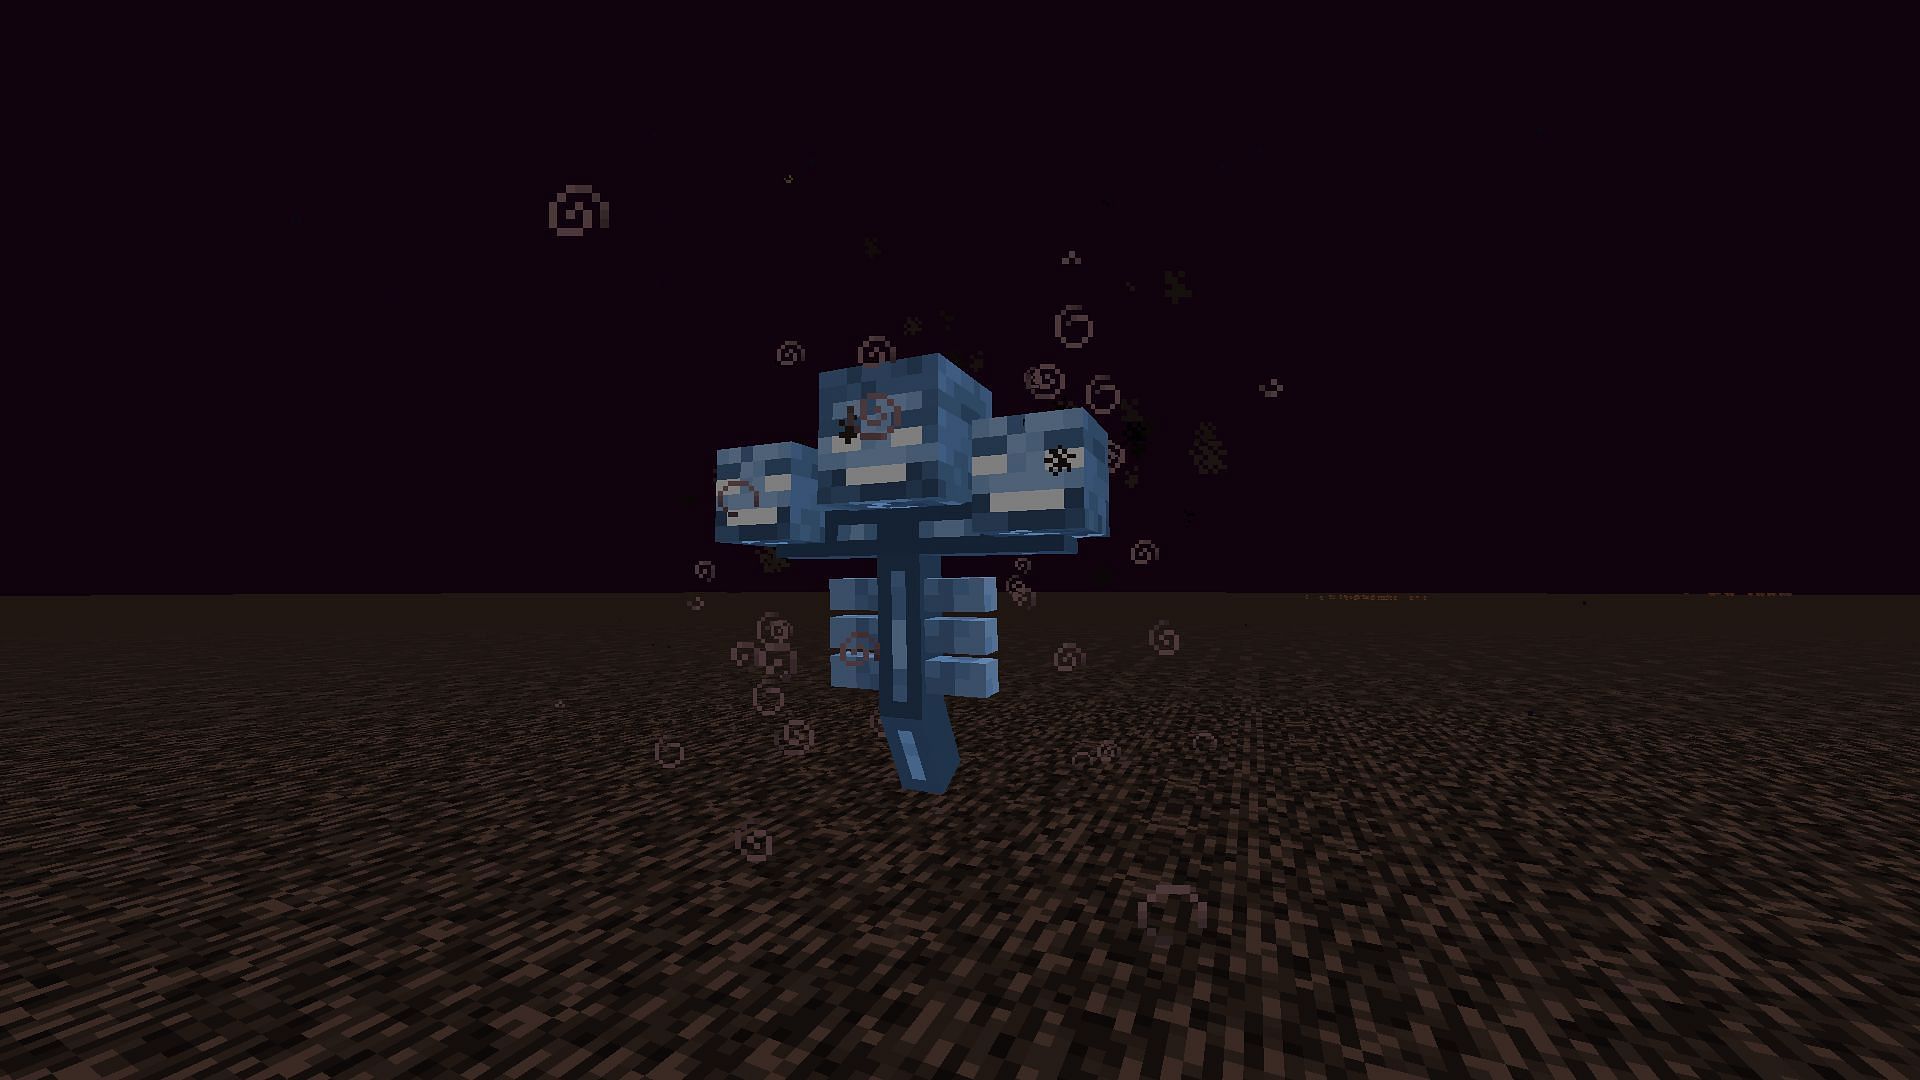 Wither (Image via Minecraft)